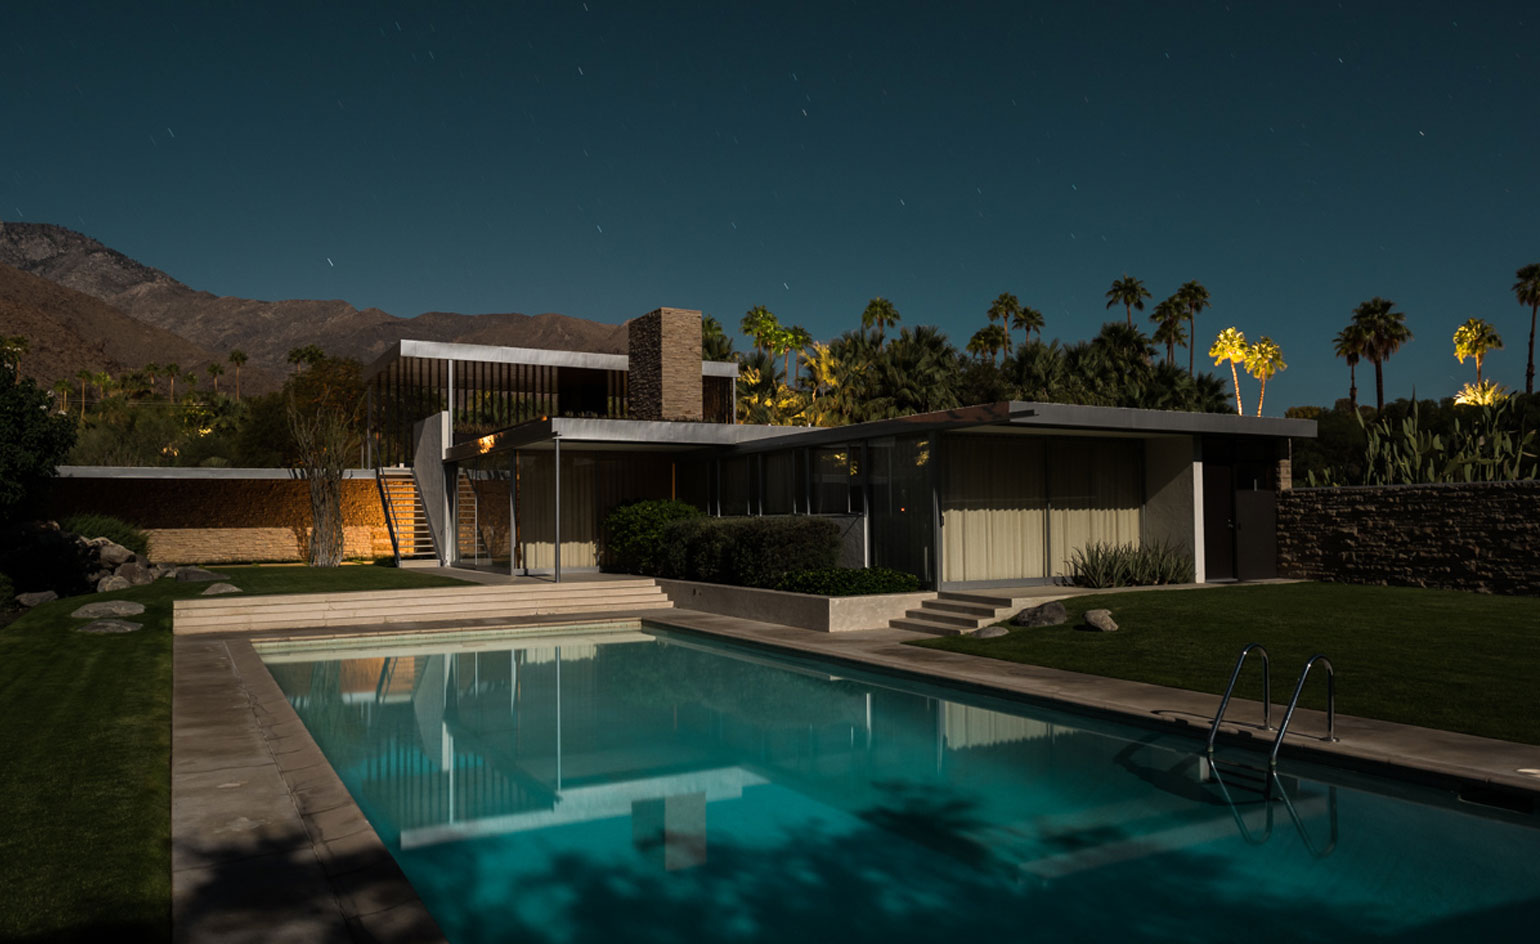 palm springs wallpaper,swimming pool,property,house,home,architecture